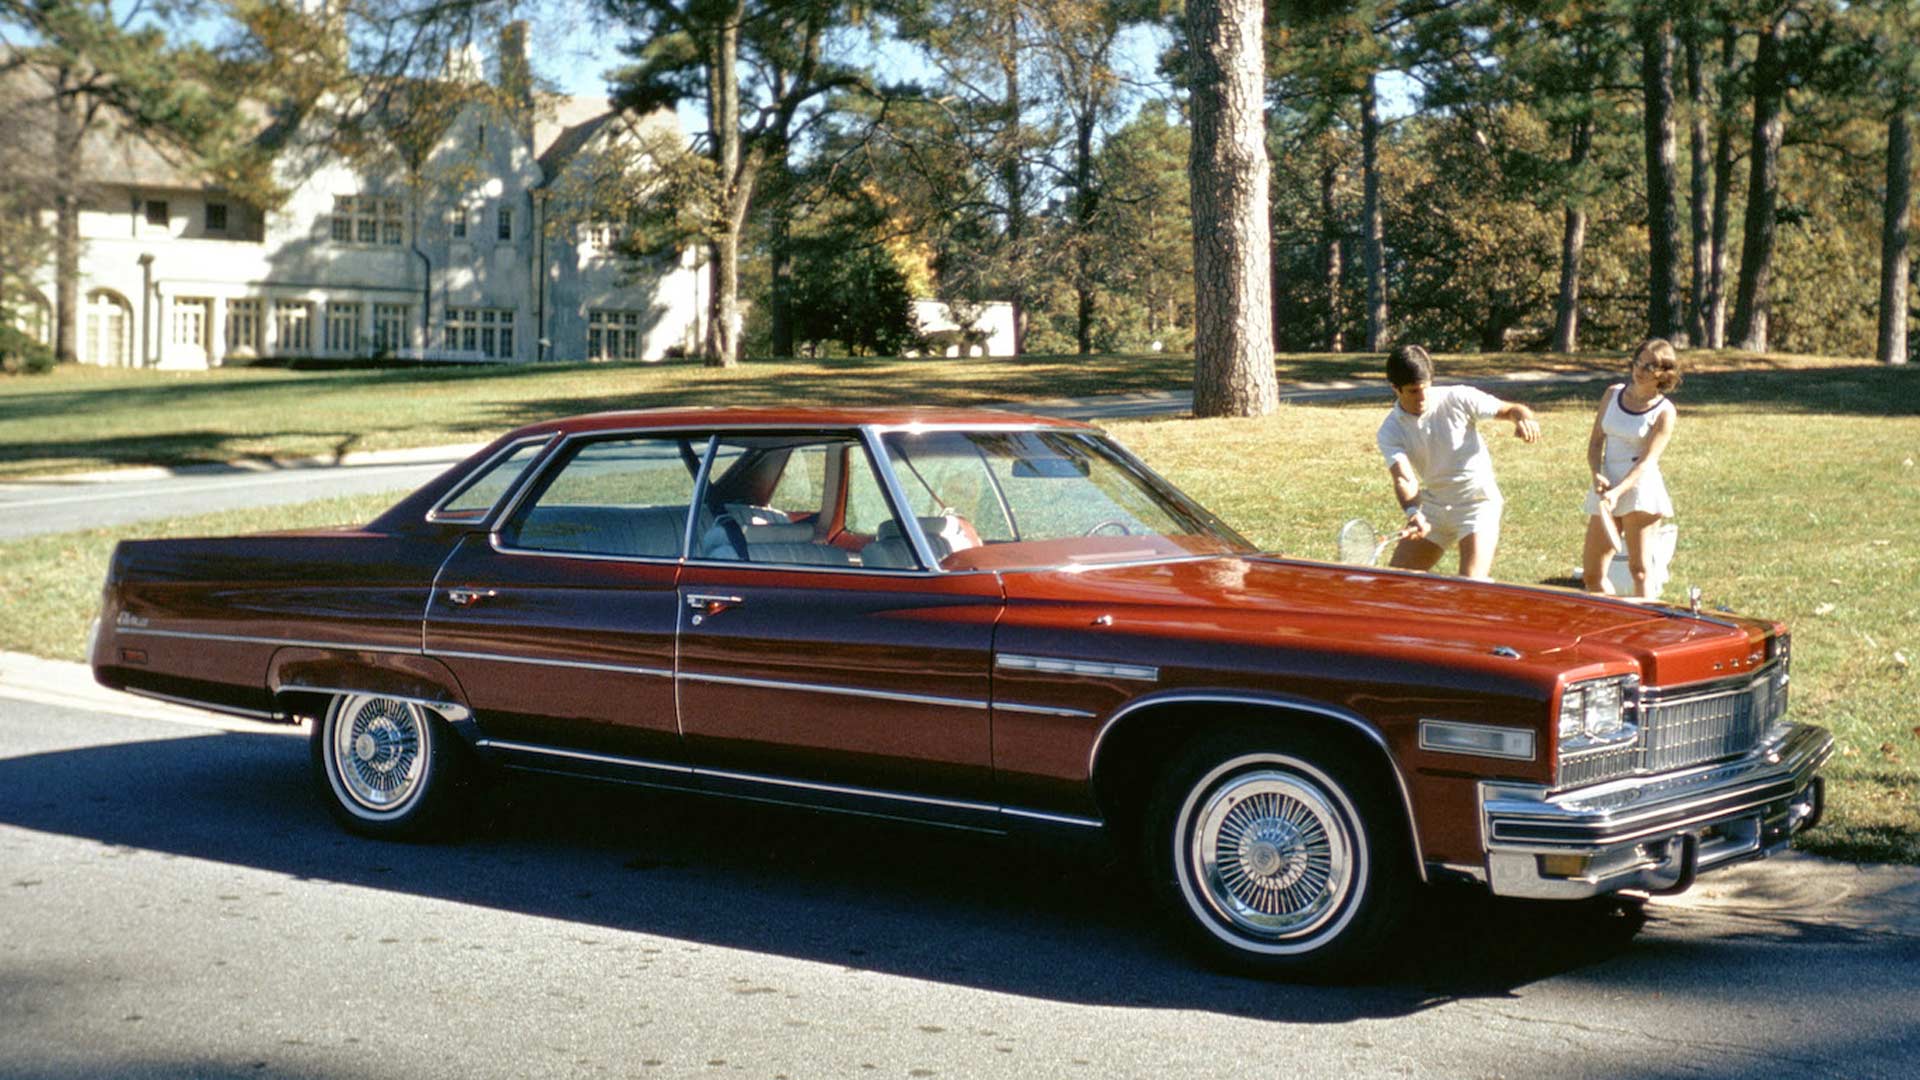 <p>Having strayed a long way from the original 225 inches, by 1975 the Electra was now one of the biggest monsters roaming the turnpike. According to Buick, the 225 was for those who wanted to drive a luxury car but without being pretentious.</p> <p>However, the promotional photo, taken outside a sprawling mansion, somewhat begs to differ, while interior options included plush patterned velour upholstery. Sadly, the steadfast 7.5-liter (455-ci) engine was now smothered by emissions and fuel-saving changes, producing only 205hp.</p>